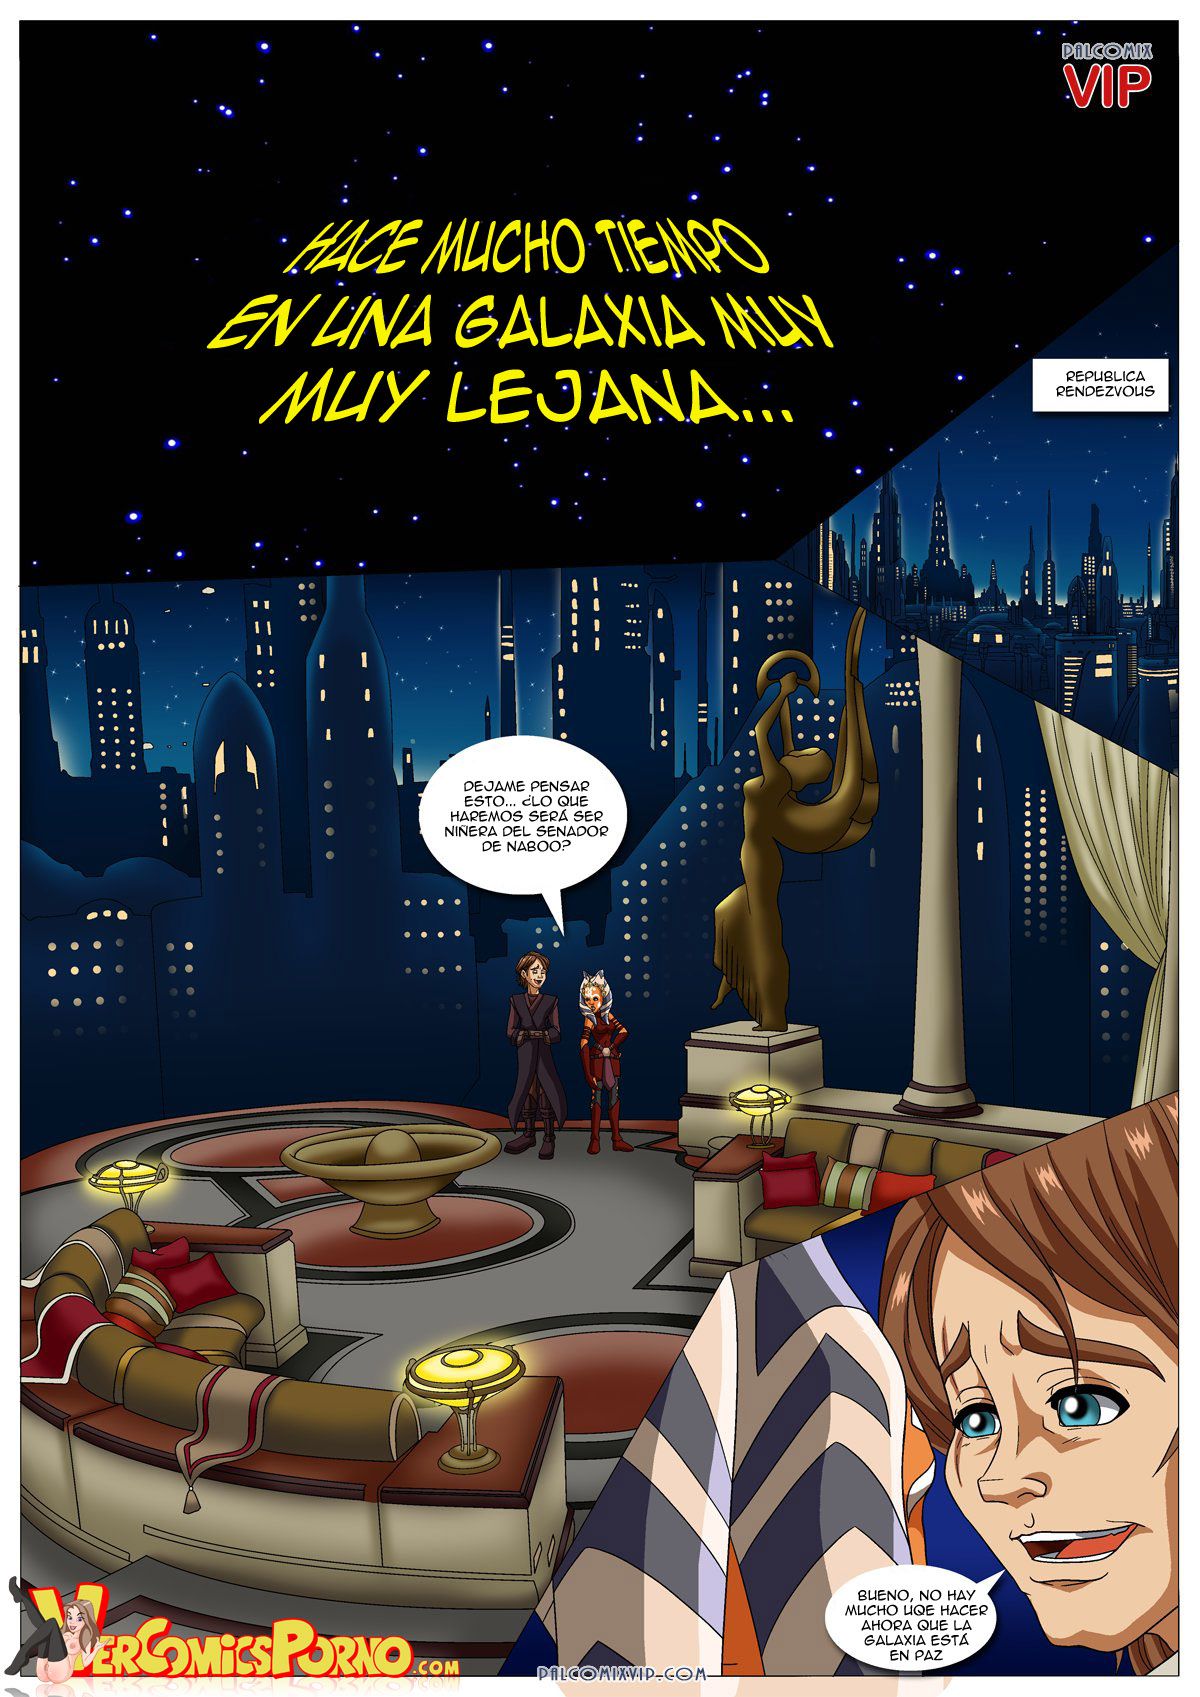 Funny Palcomix Republic Rendezvous Star Wars Spanish Ongoing